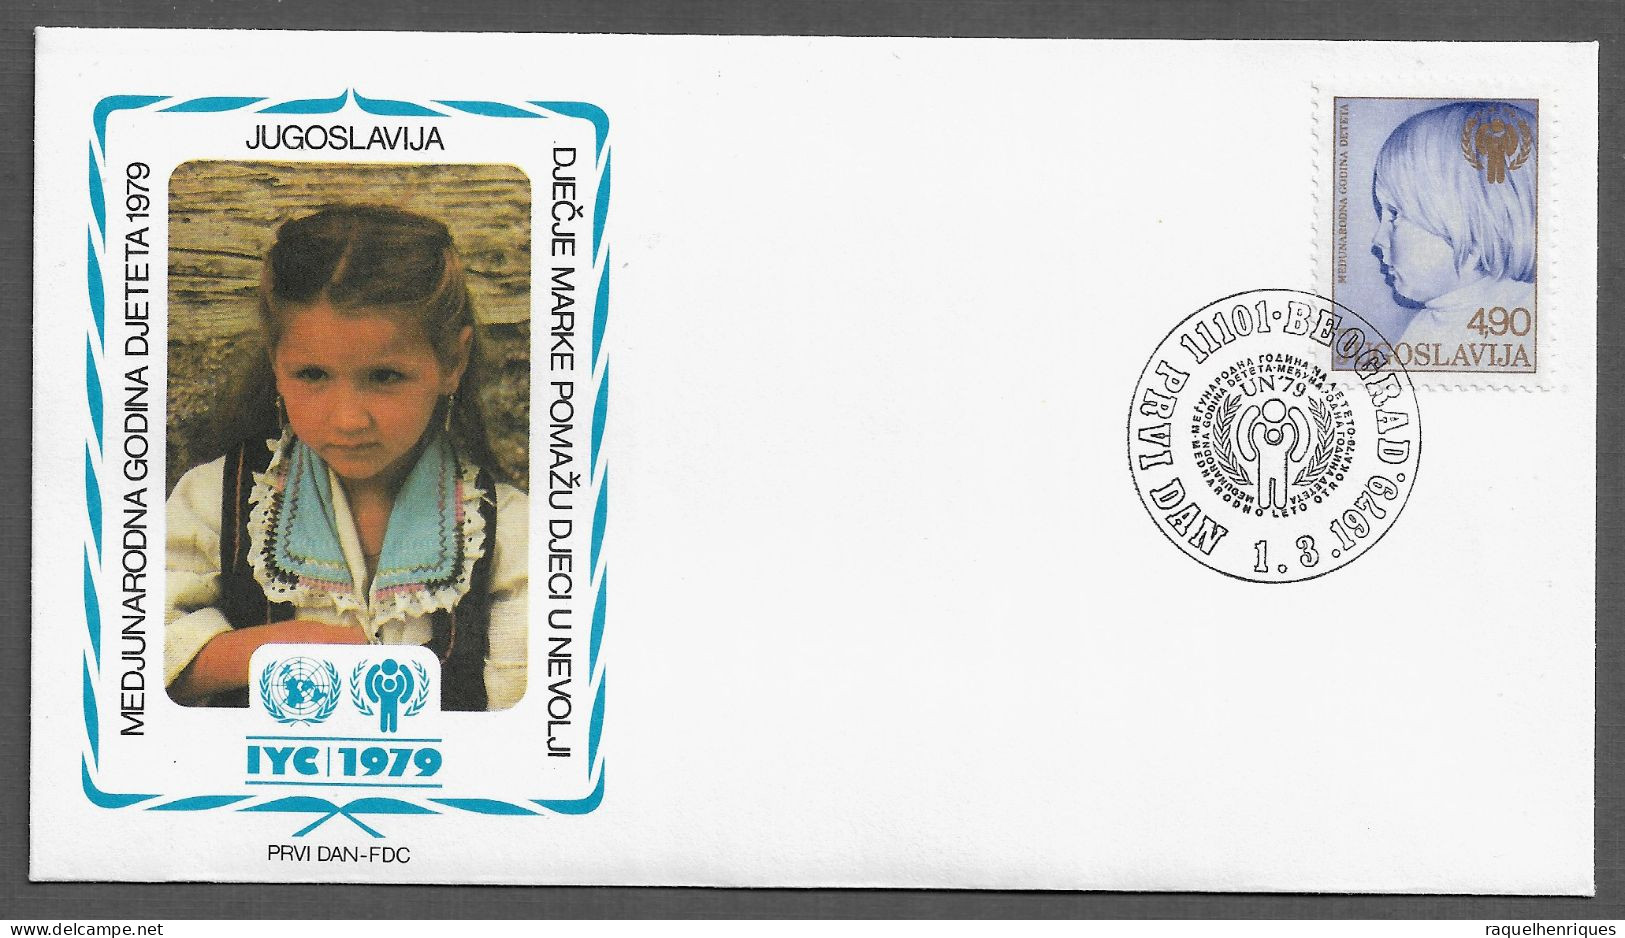 YUGOSLAVIA FDC COVER - 1979 International Year Of The Child SET FDC (FDC79#08) - Storia Postale